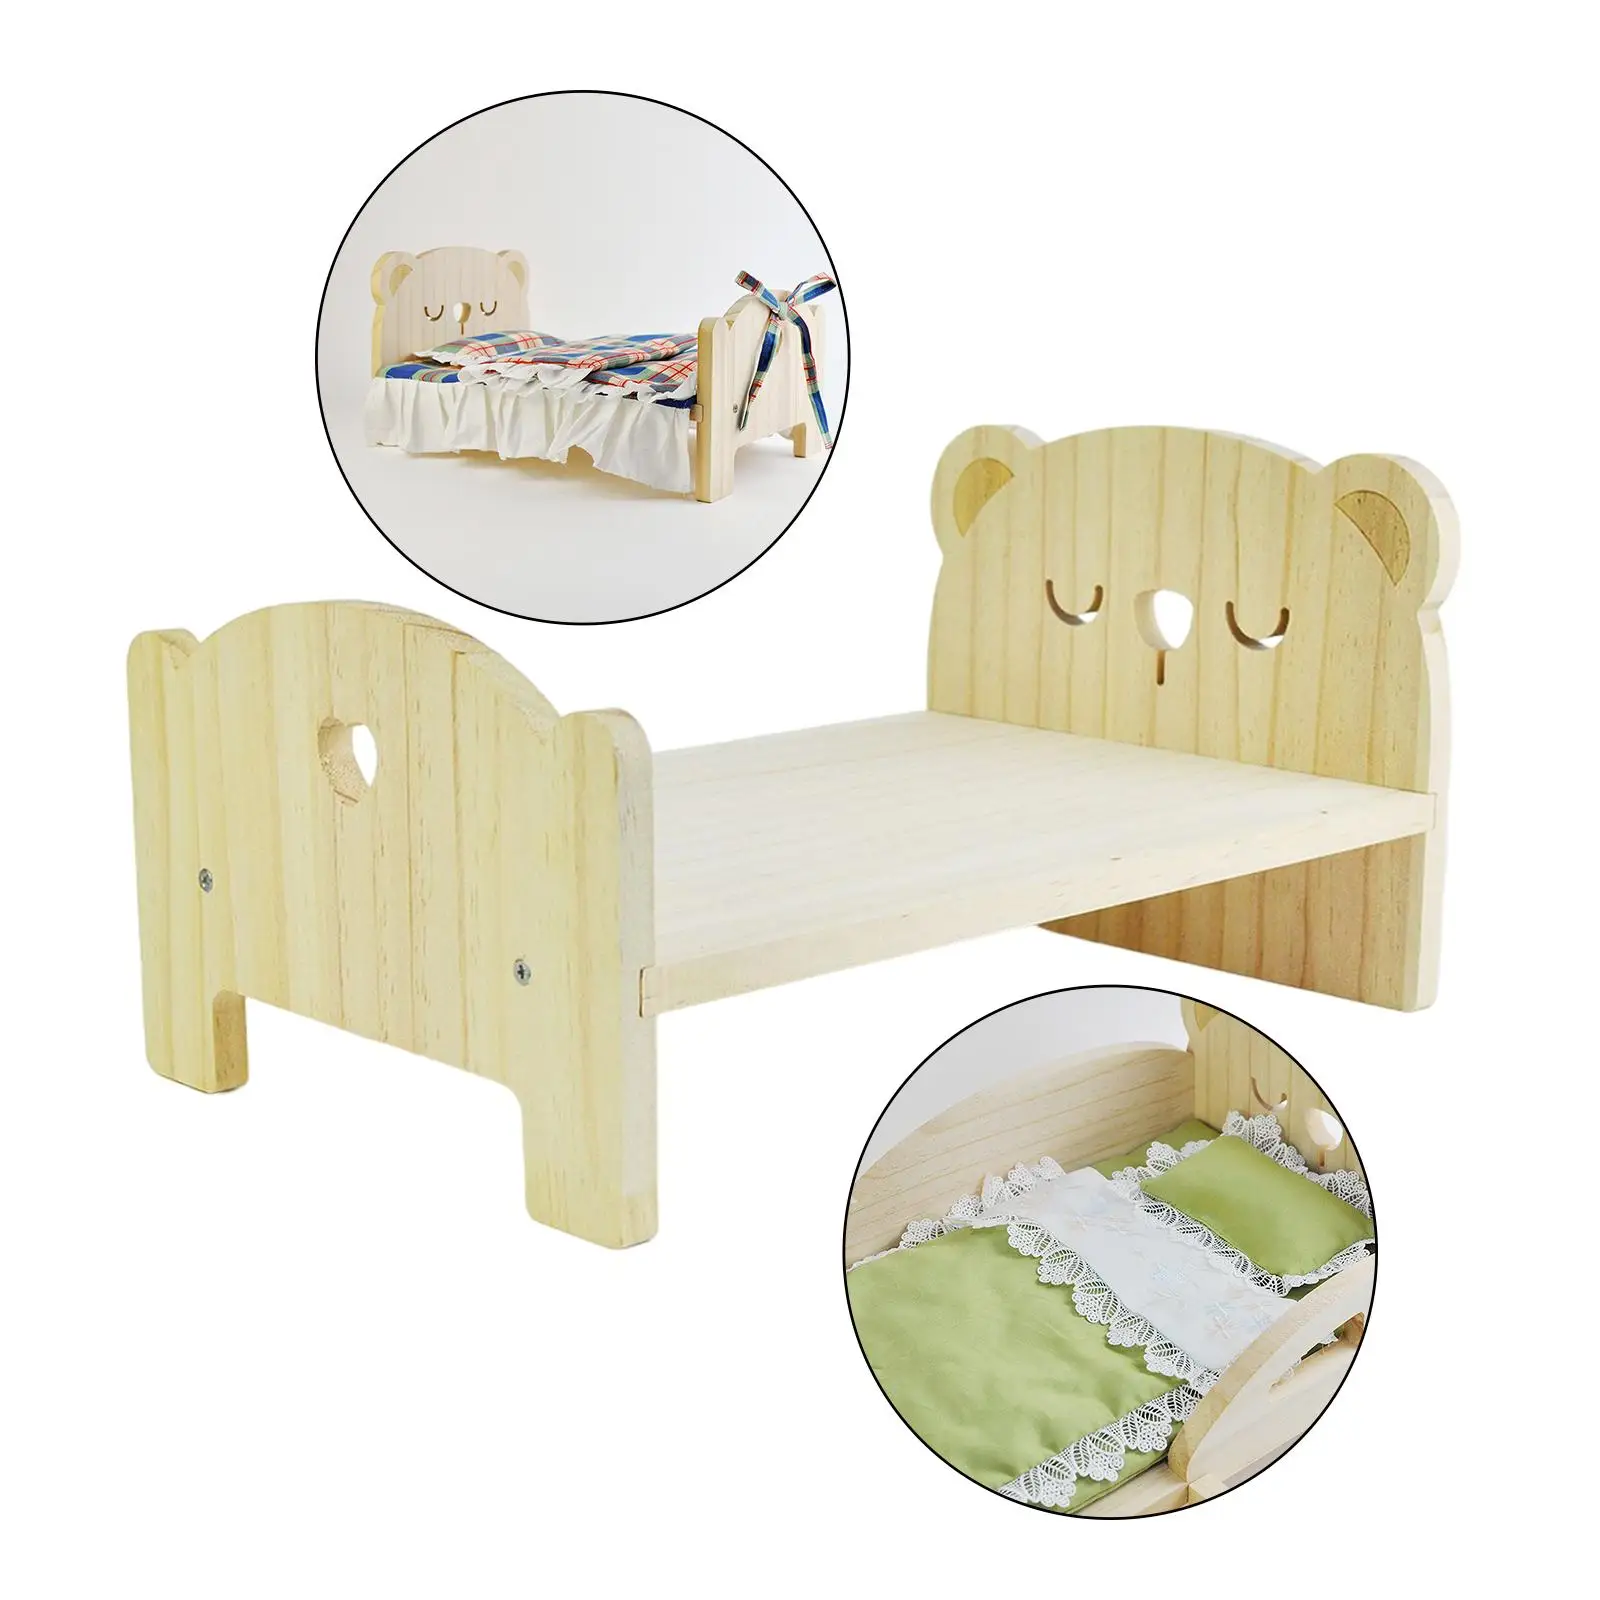 Miniature Dollhouse Furniture 1:6 Decoration Wooden Bed for Dolls Bedroom Life Scene Props Dollhouses DIY Accessories